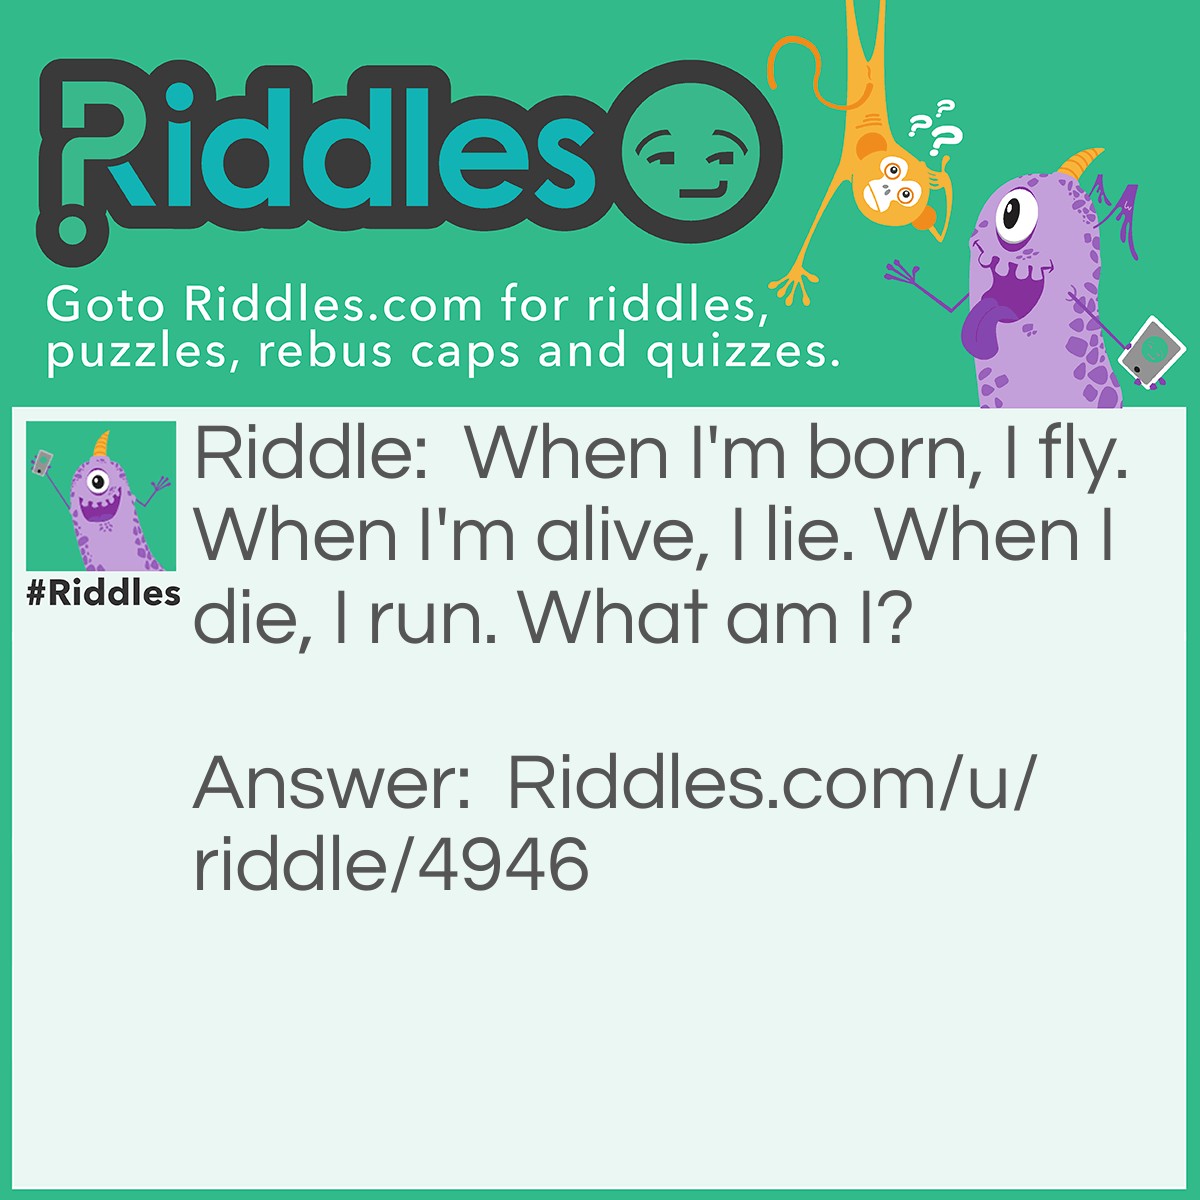 Riddle: When I'm born, I fly. When I'm alive, I lie. When I die, I run. What am I? Answer: A Snowflake.